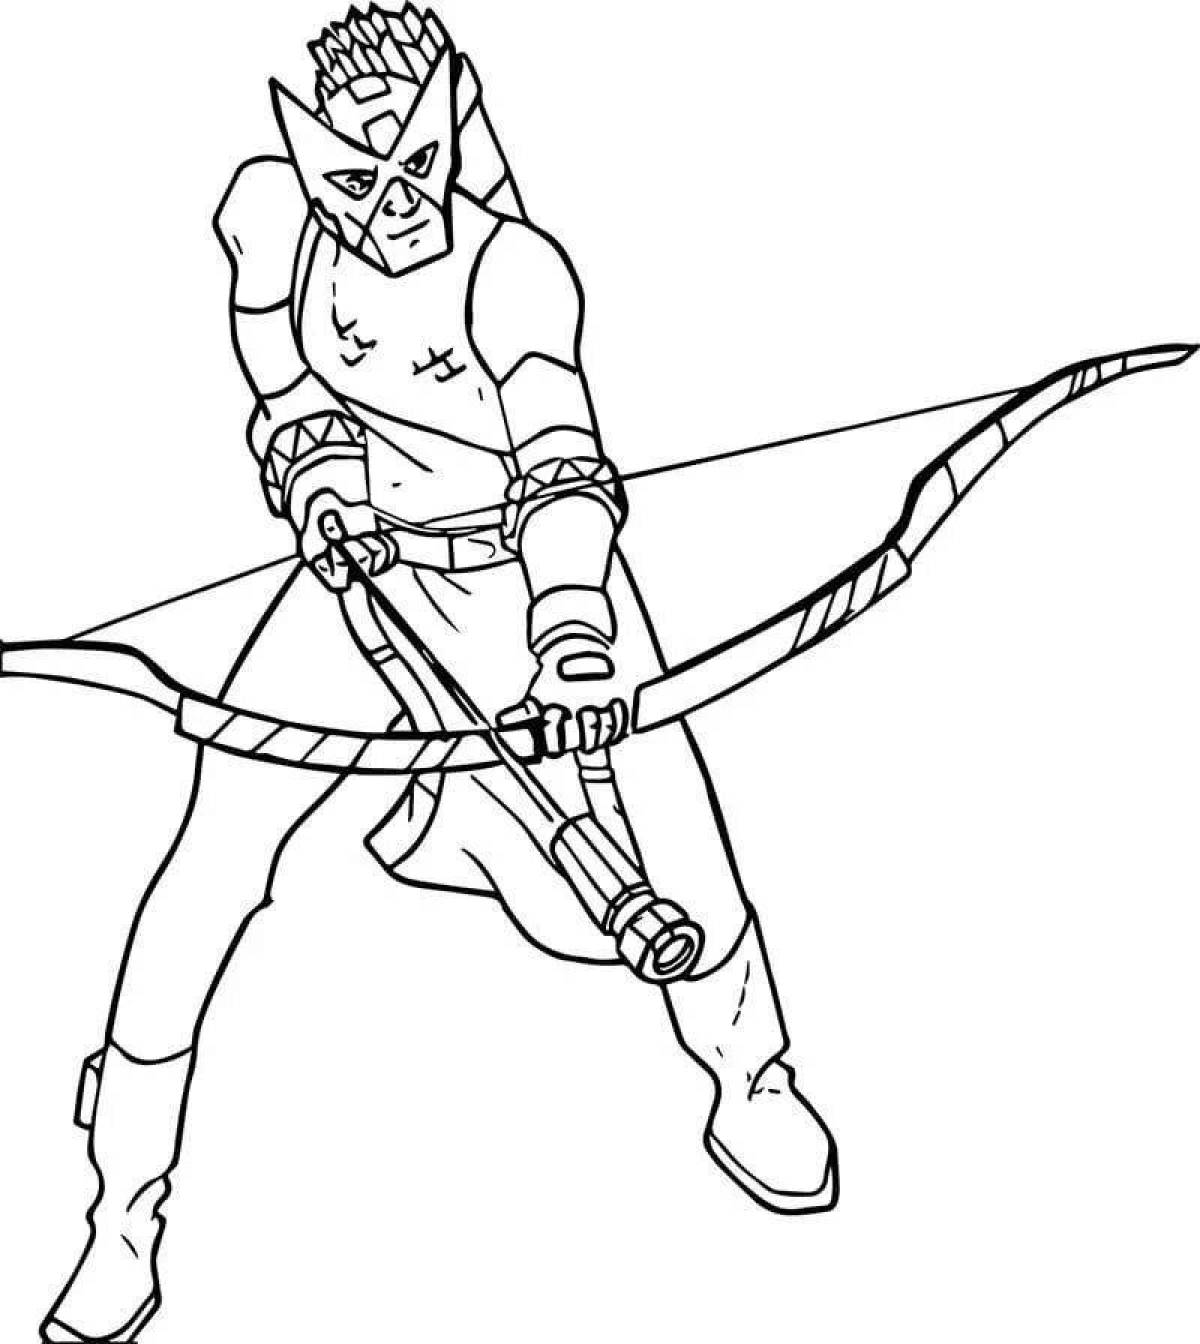 Adorable Hawkeye Coloring Page